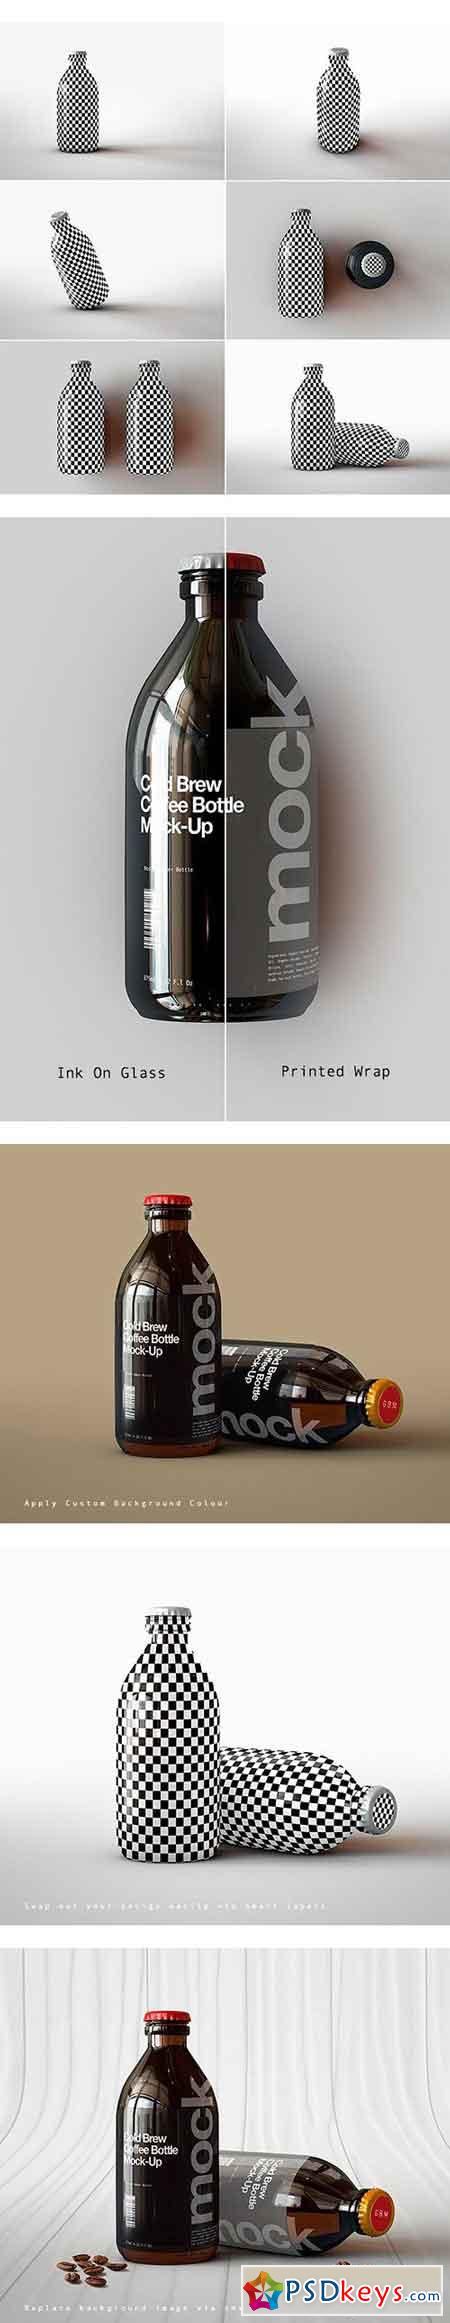 Cold Brew Coffee Bottle Mock-Up 1695956